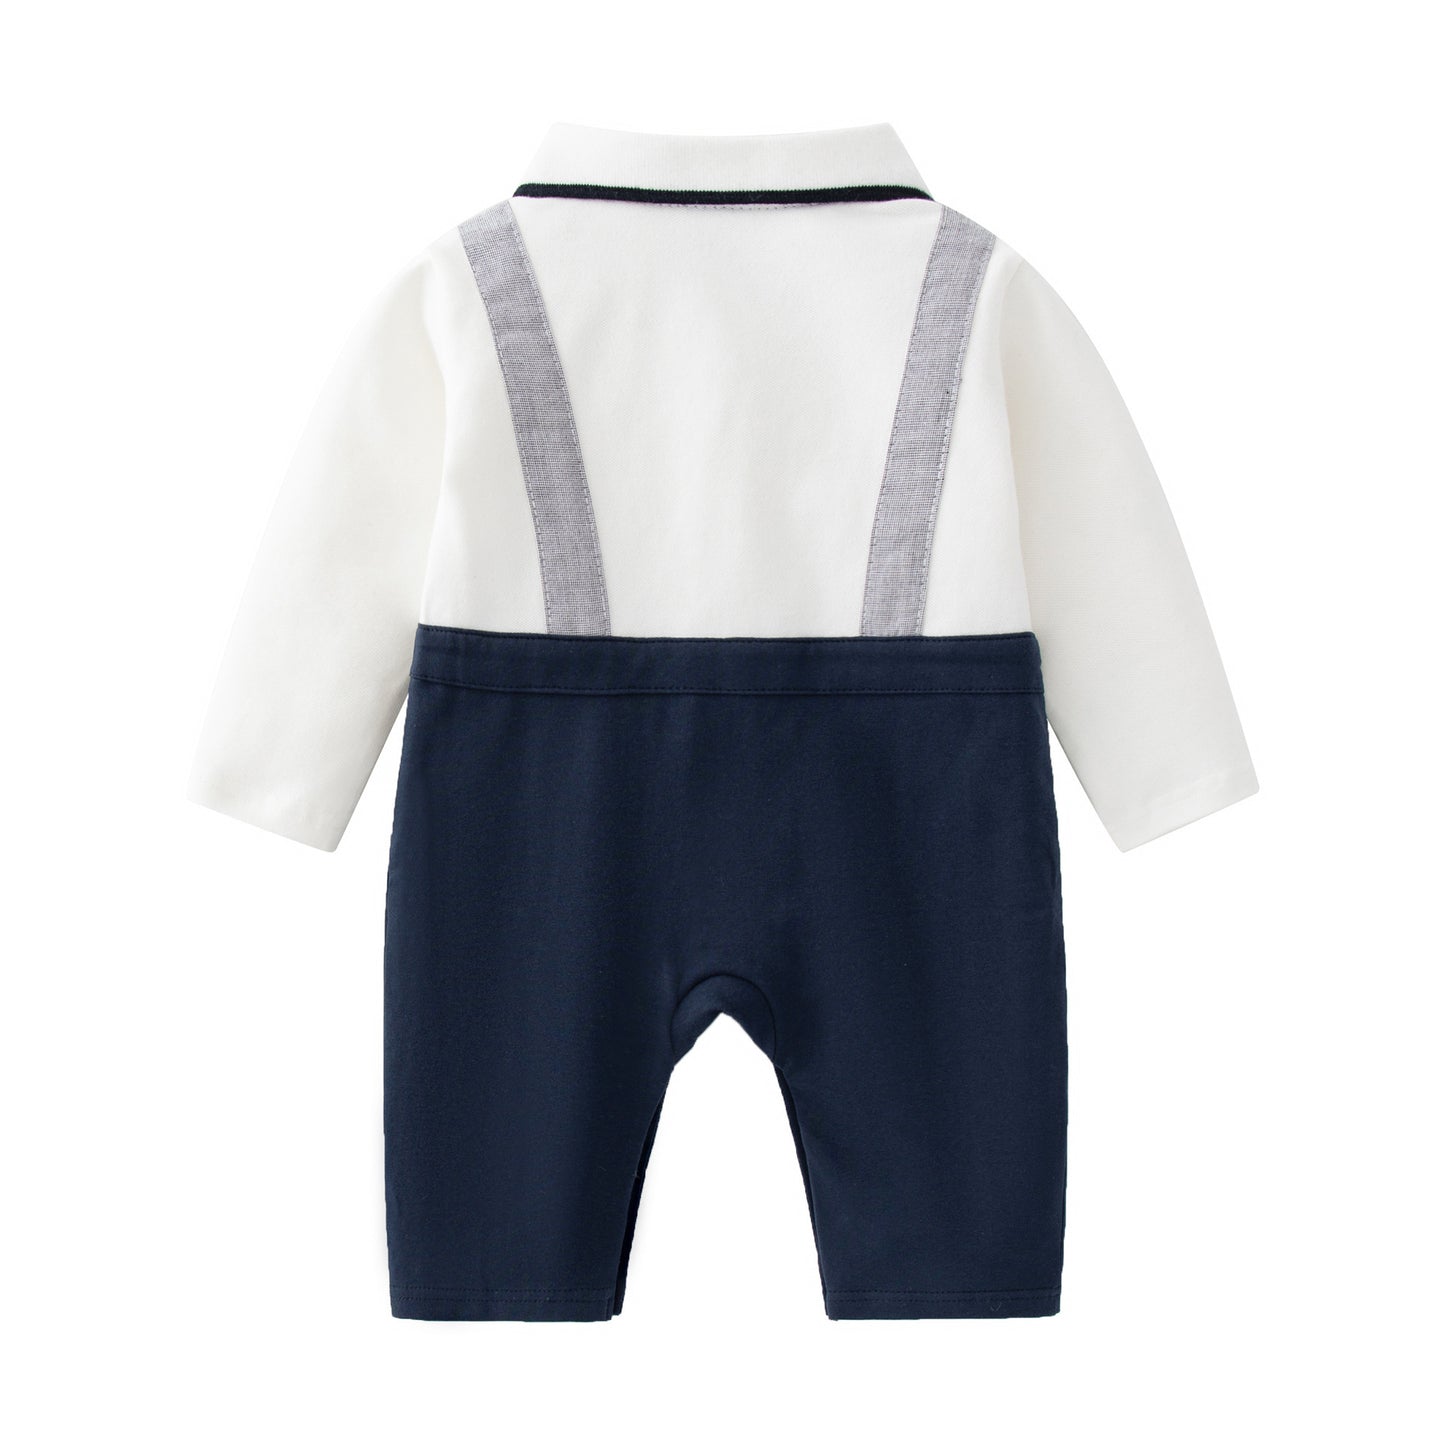 Autumn 0-1 Years Long Sleeve One Piece Romper